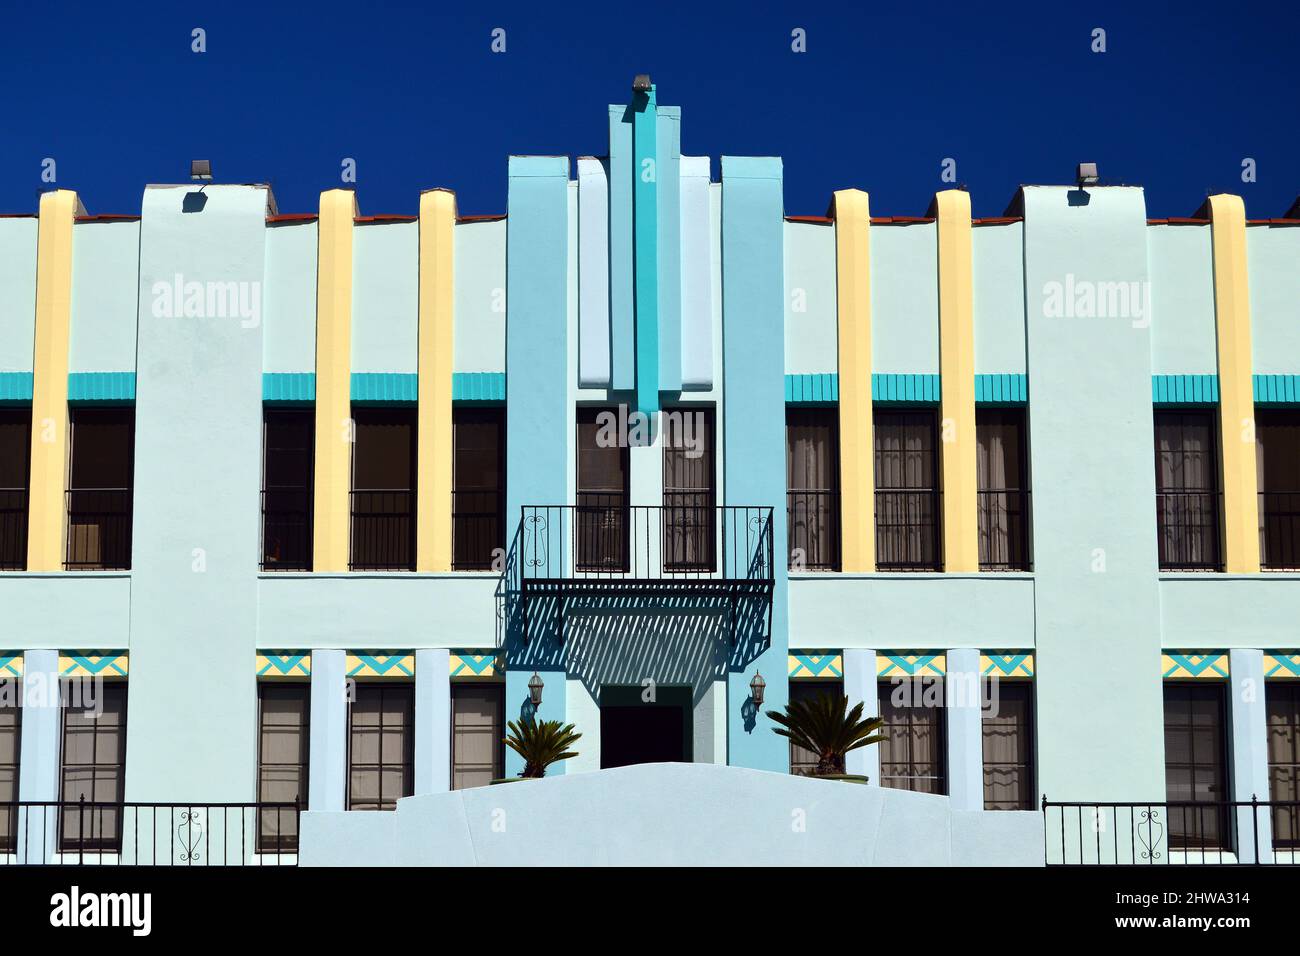 Art Deco designs on a building in Los Angeles Stock Photo